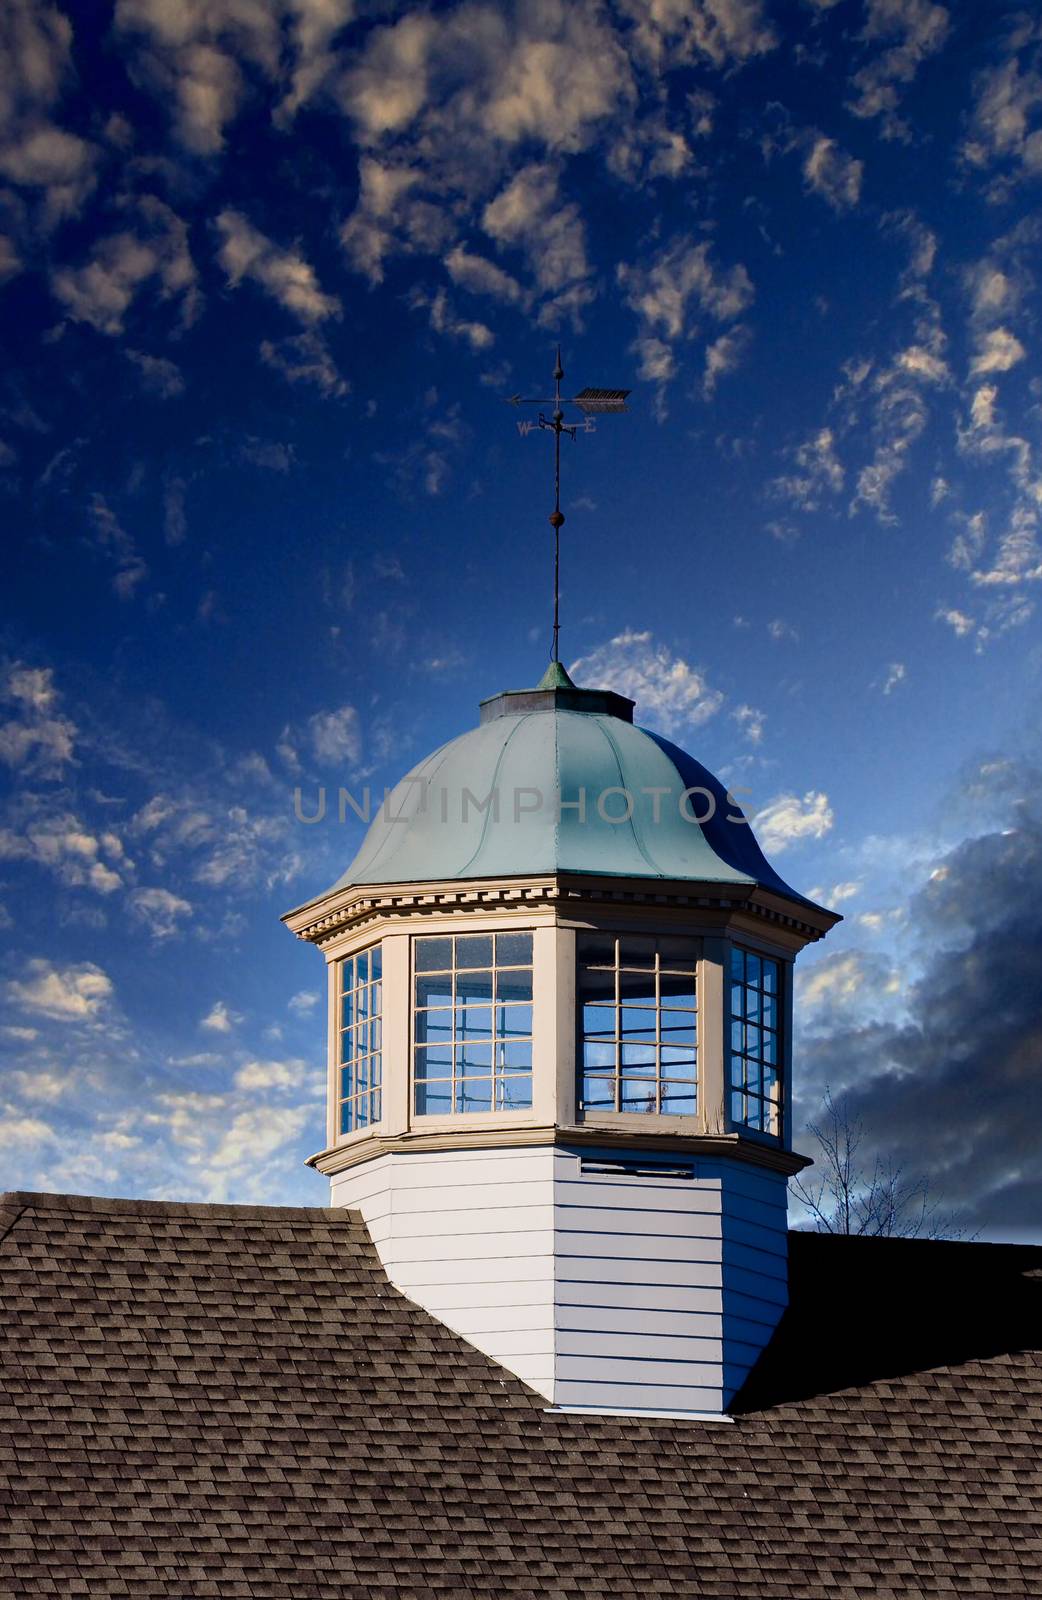 Cupola and Weather Vane at Dusk by dbvirago